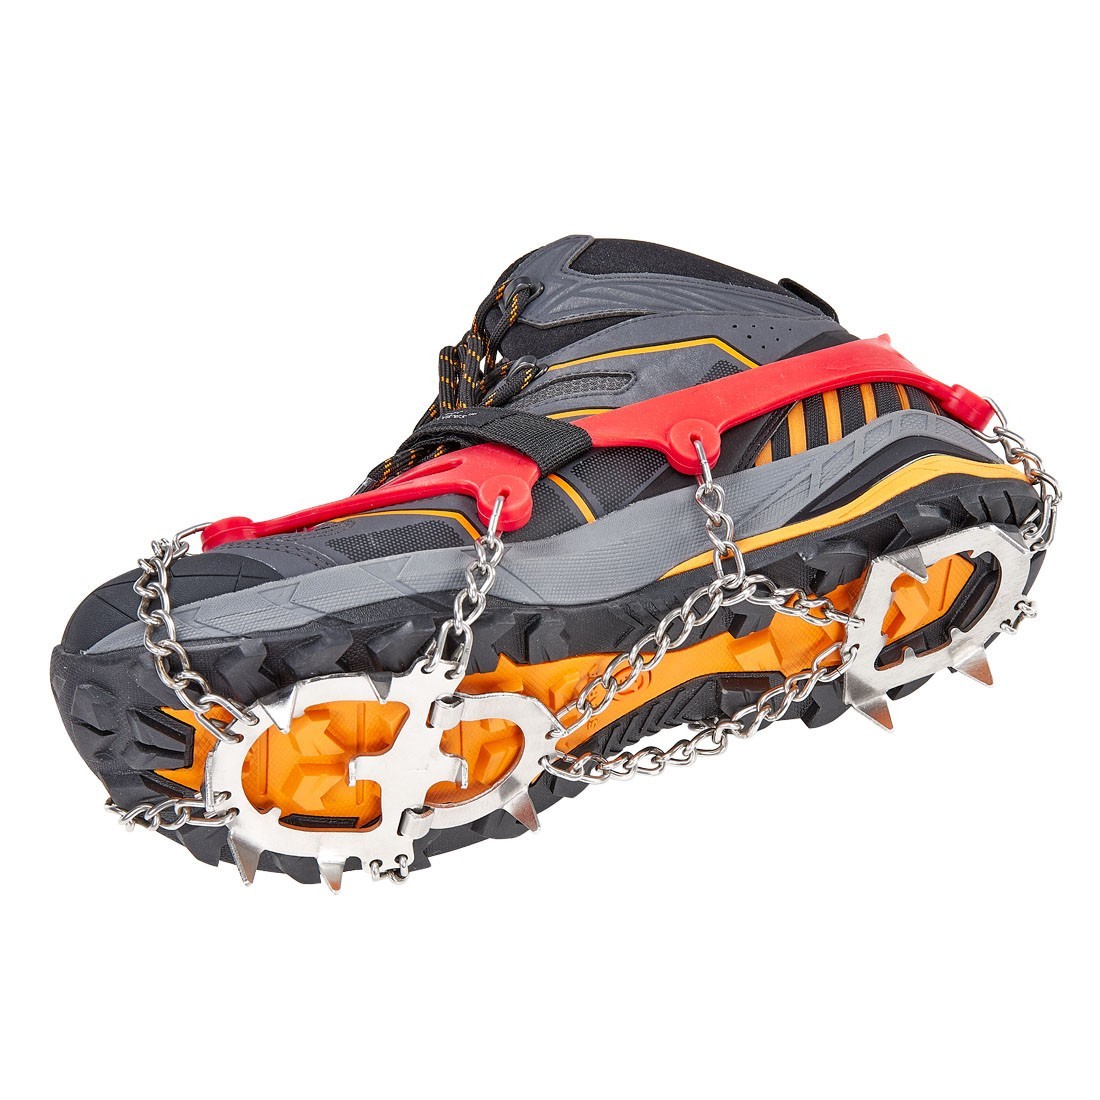 ICE CRAMPONS - Crampon with 13 points